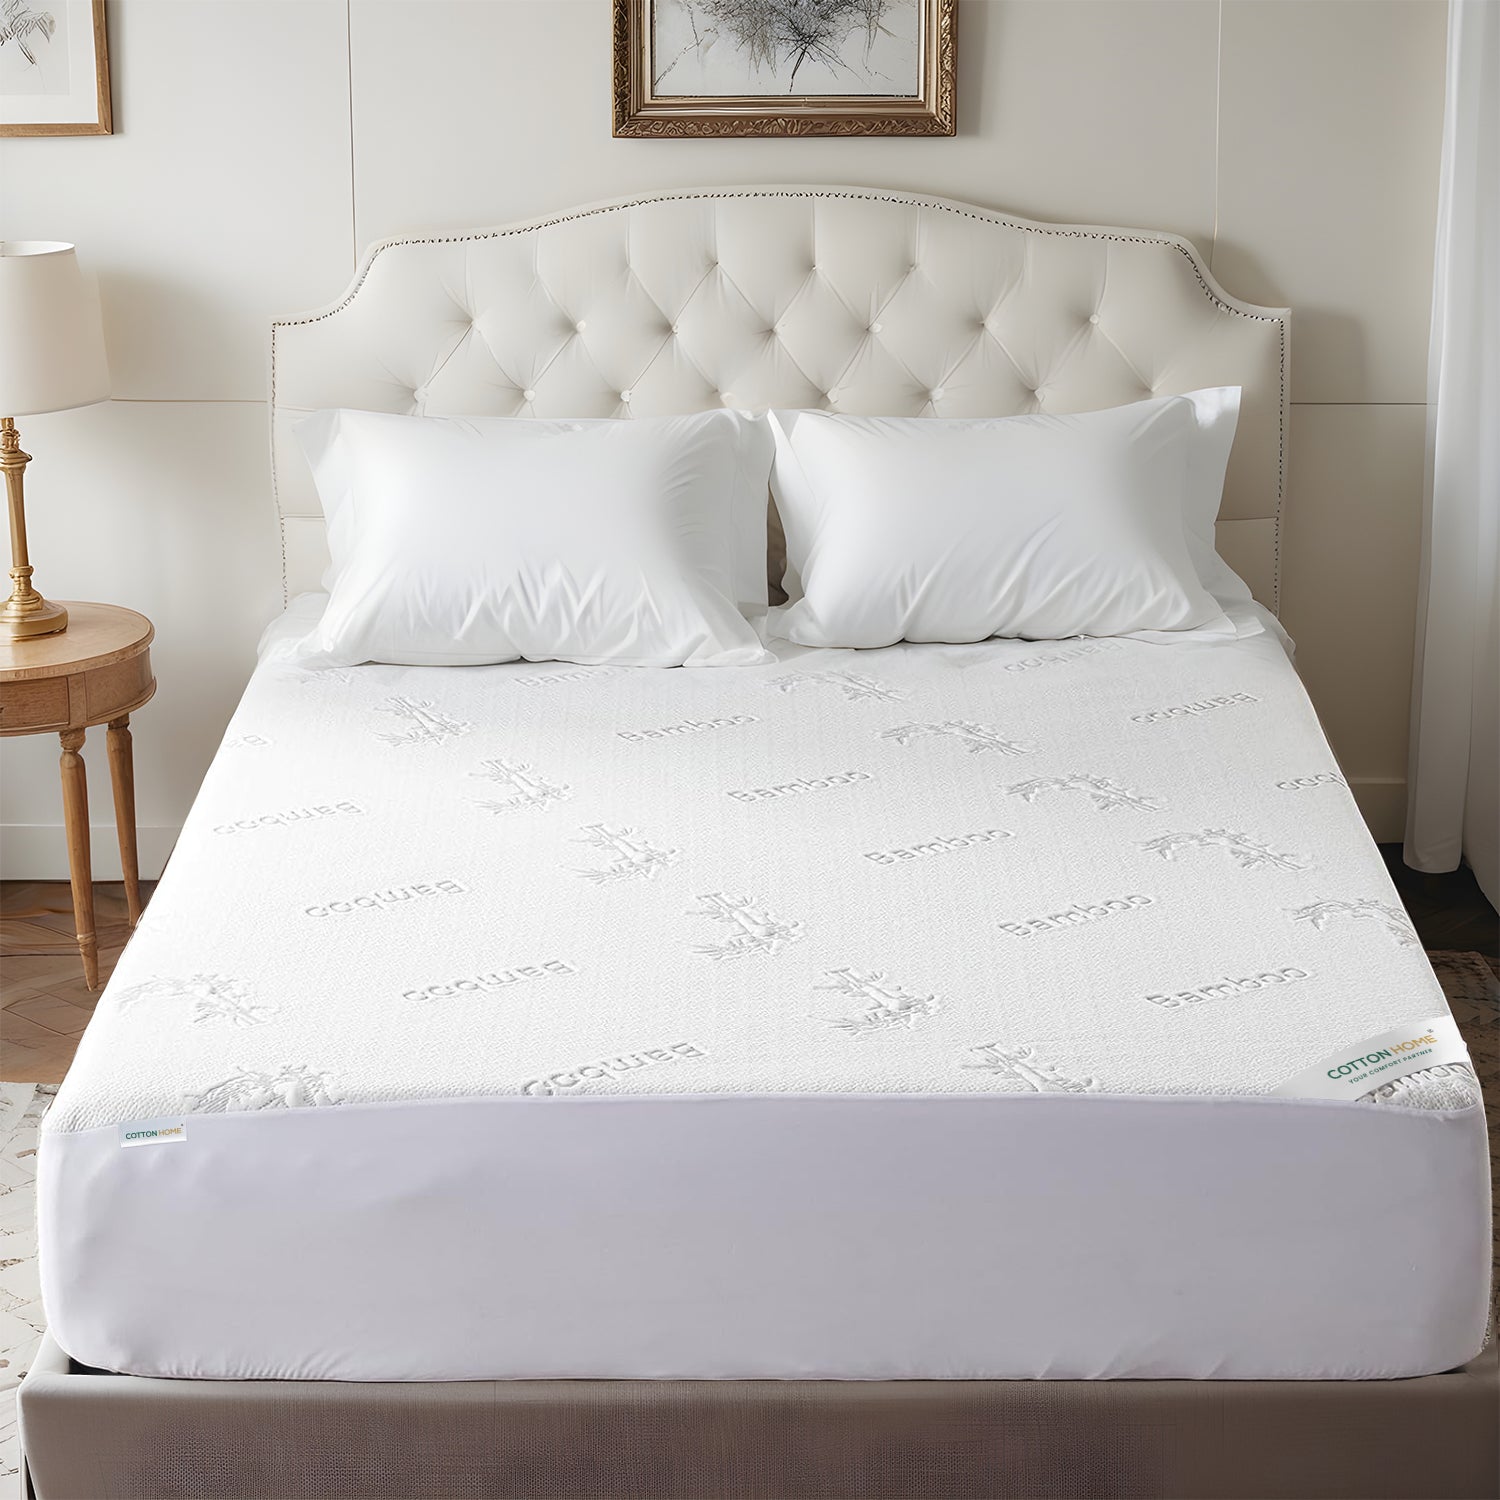 Premium Bamboo Mattress Protector 180x200+35CM | Gray | Breathable & Waterproof by Cotton Home